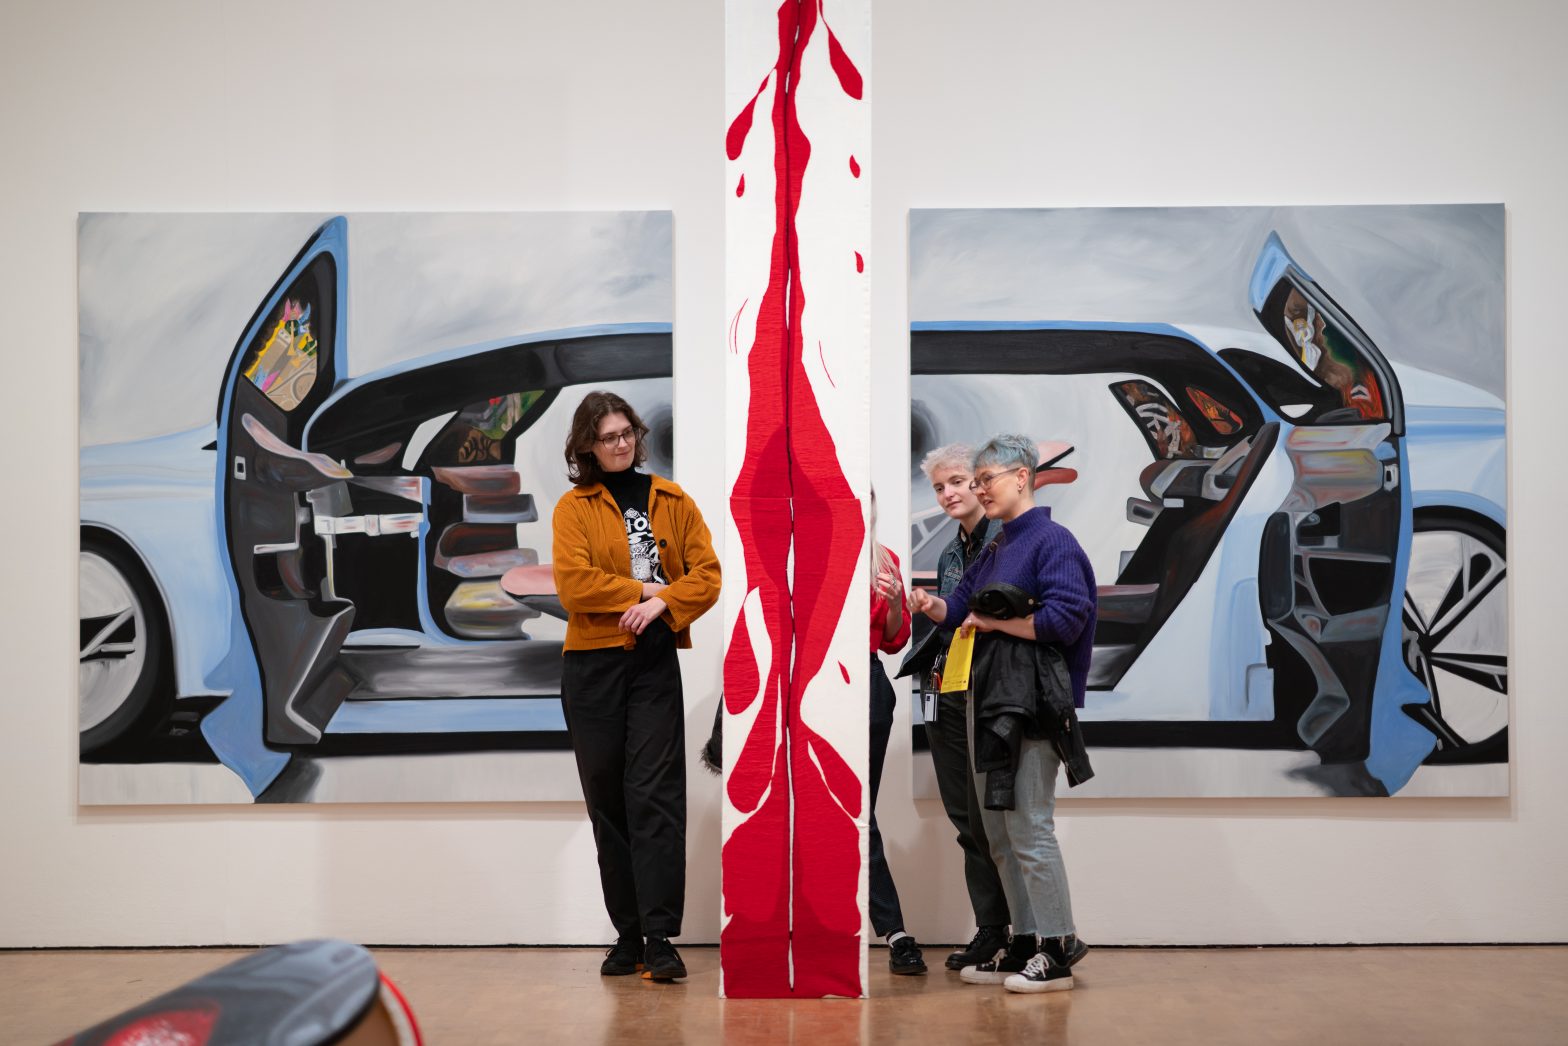 3 people stand admiring a bright red embroidered artwork by Frieda Toranzo Jaeger.